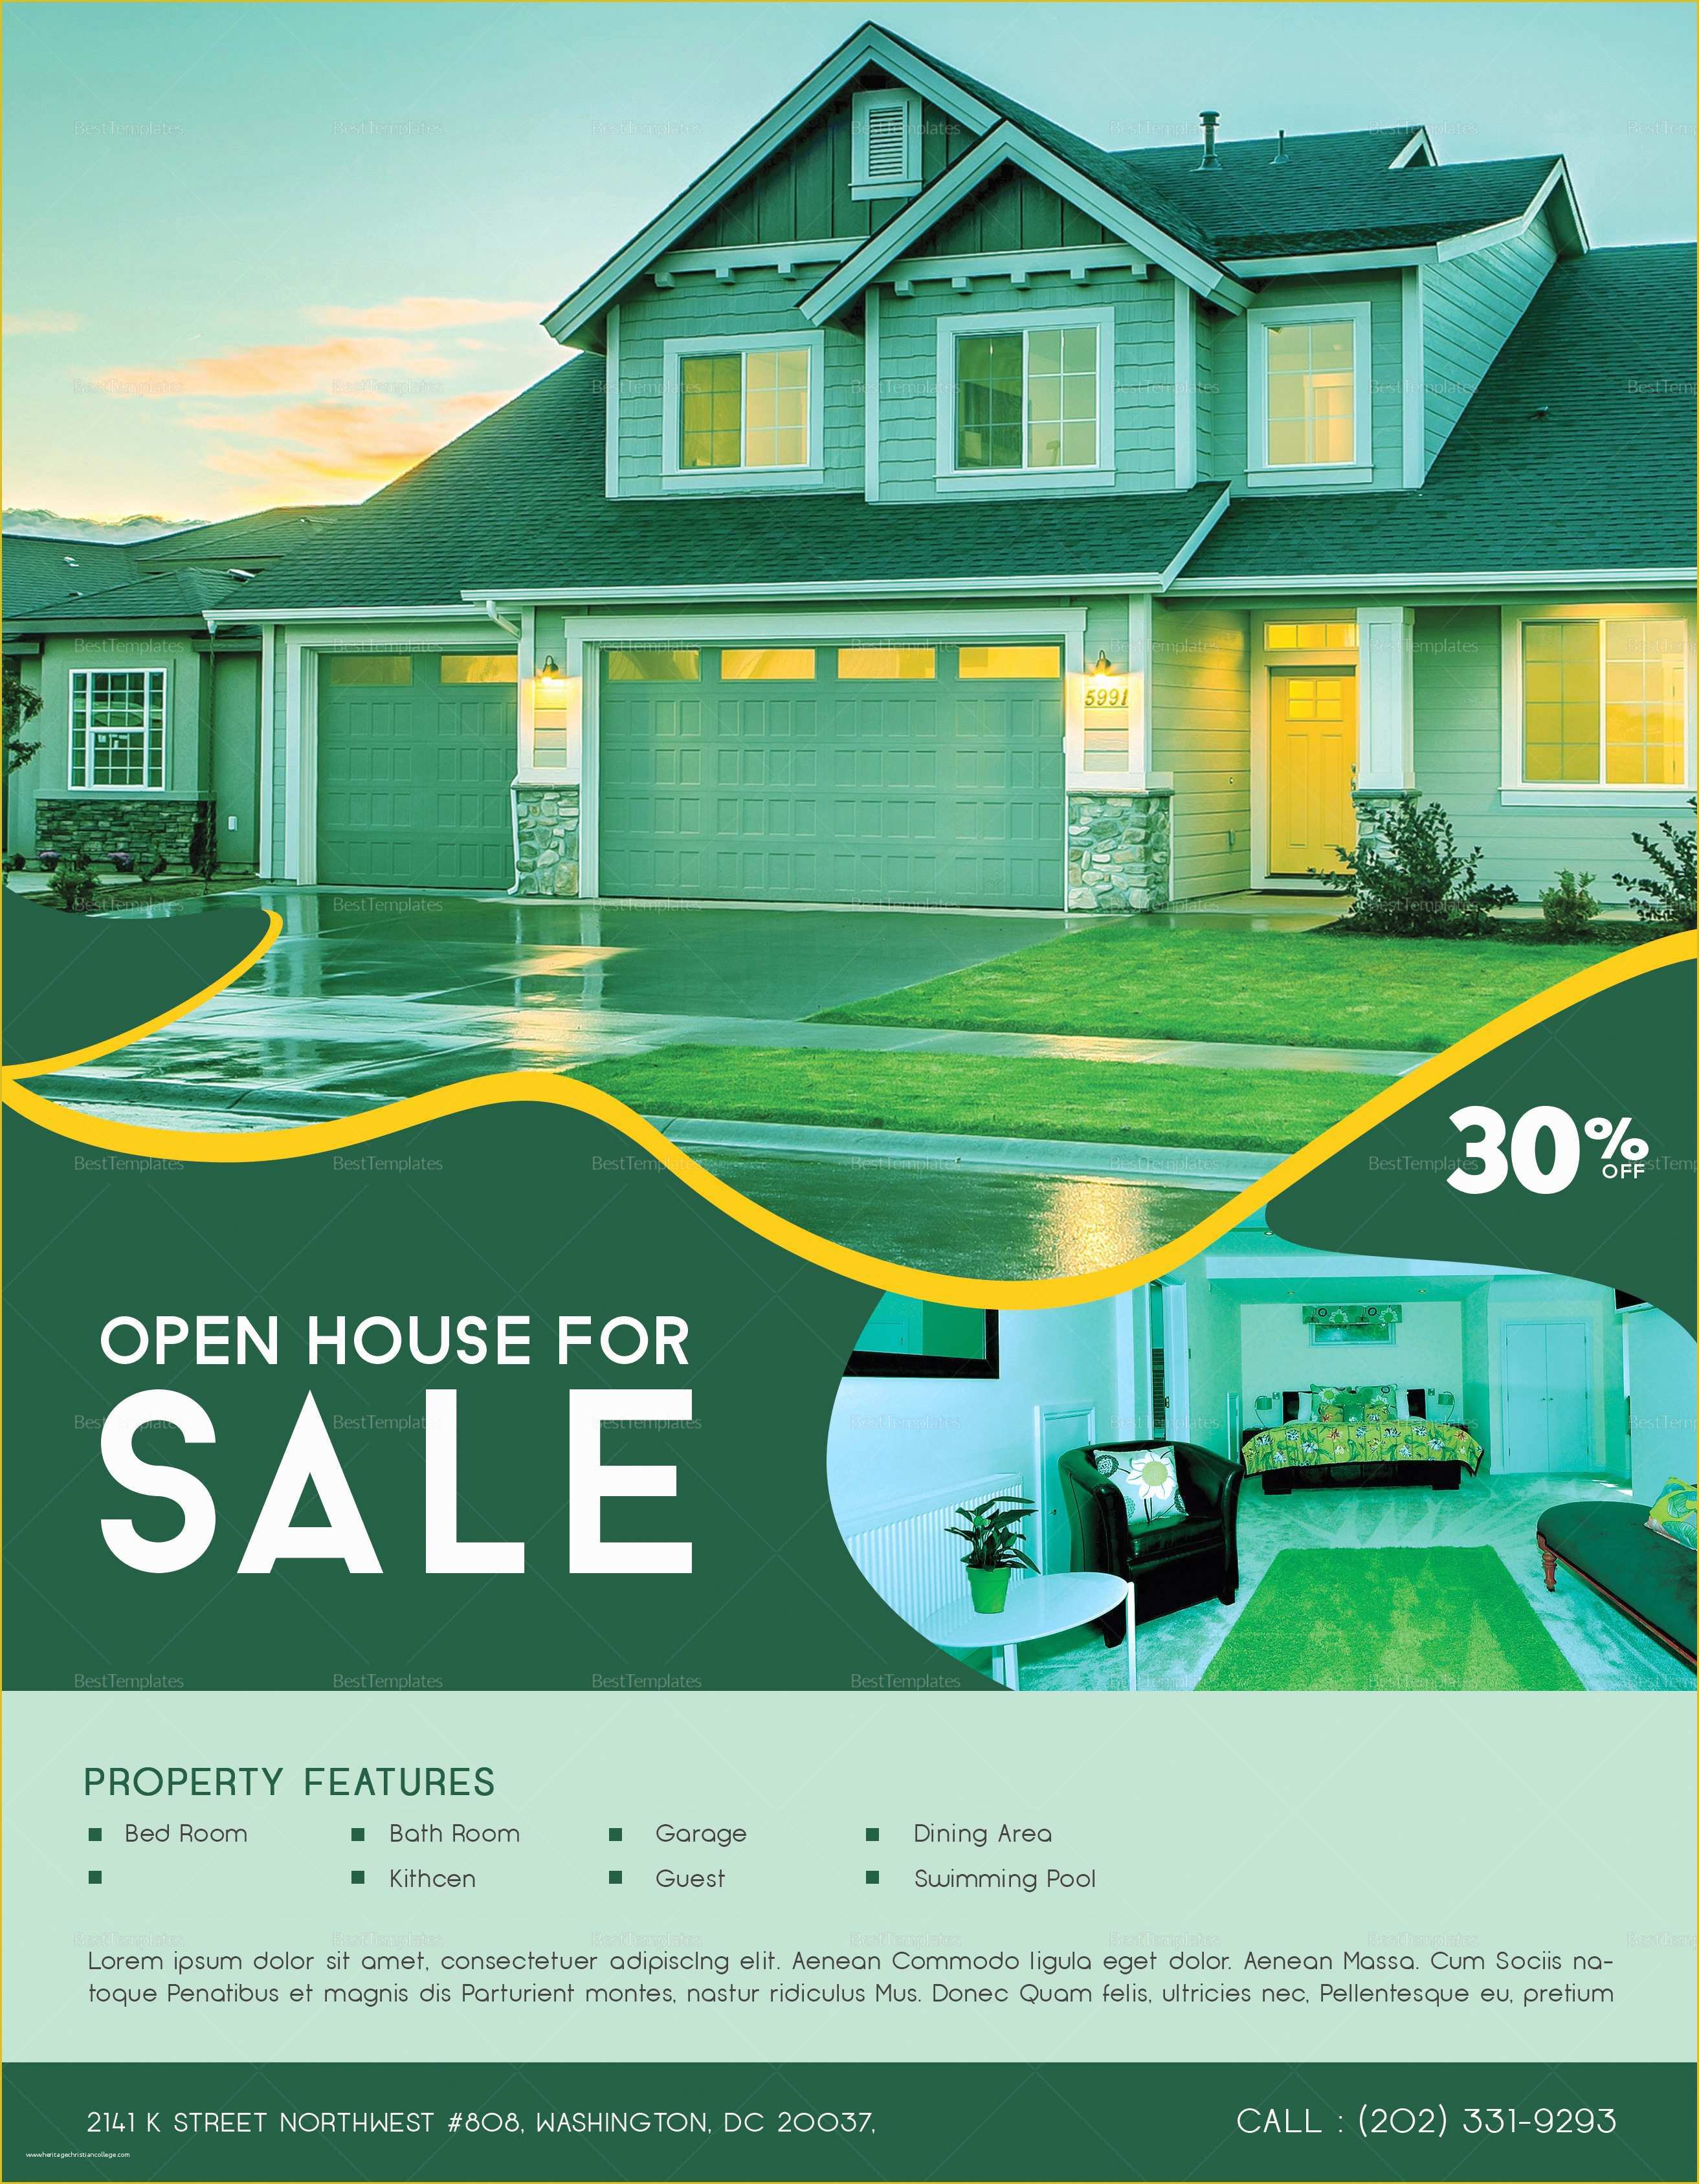 Open House Flyer Template Free Publisher Of Open House Sale Flyer Design Template In Word Psd Publisher